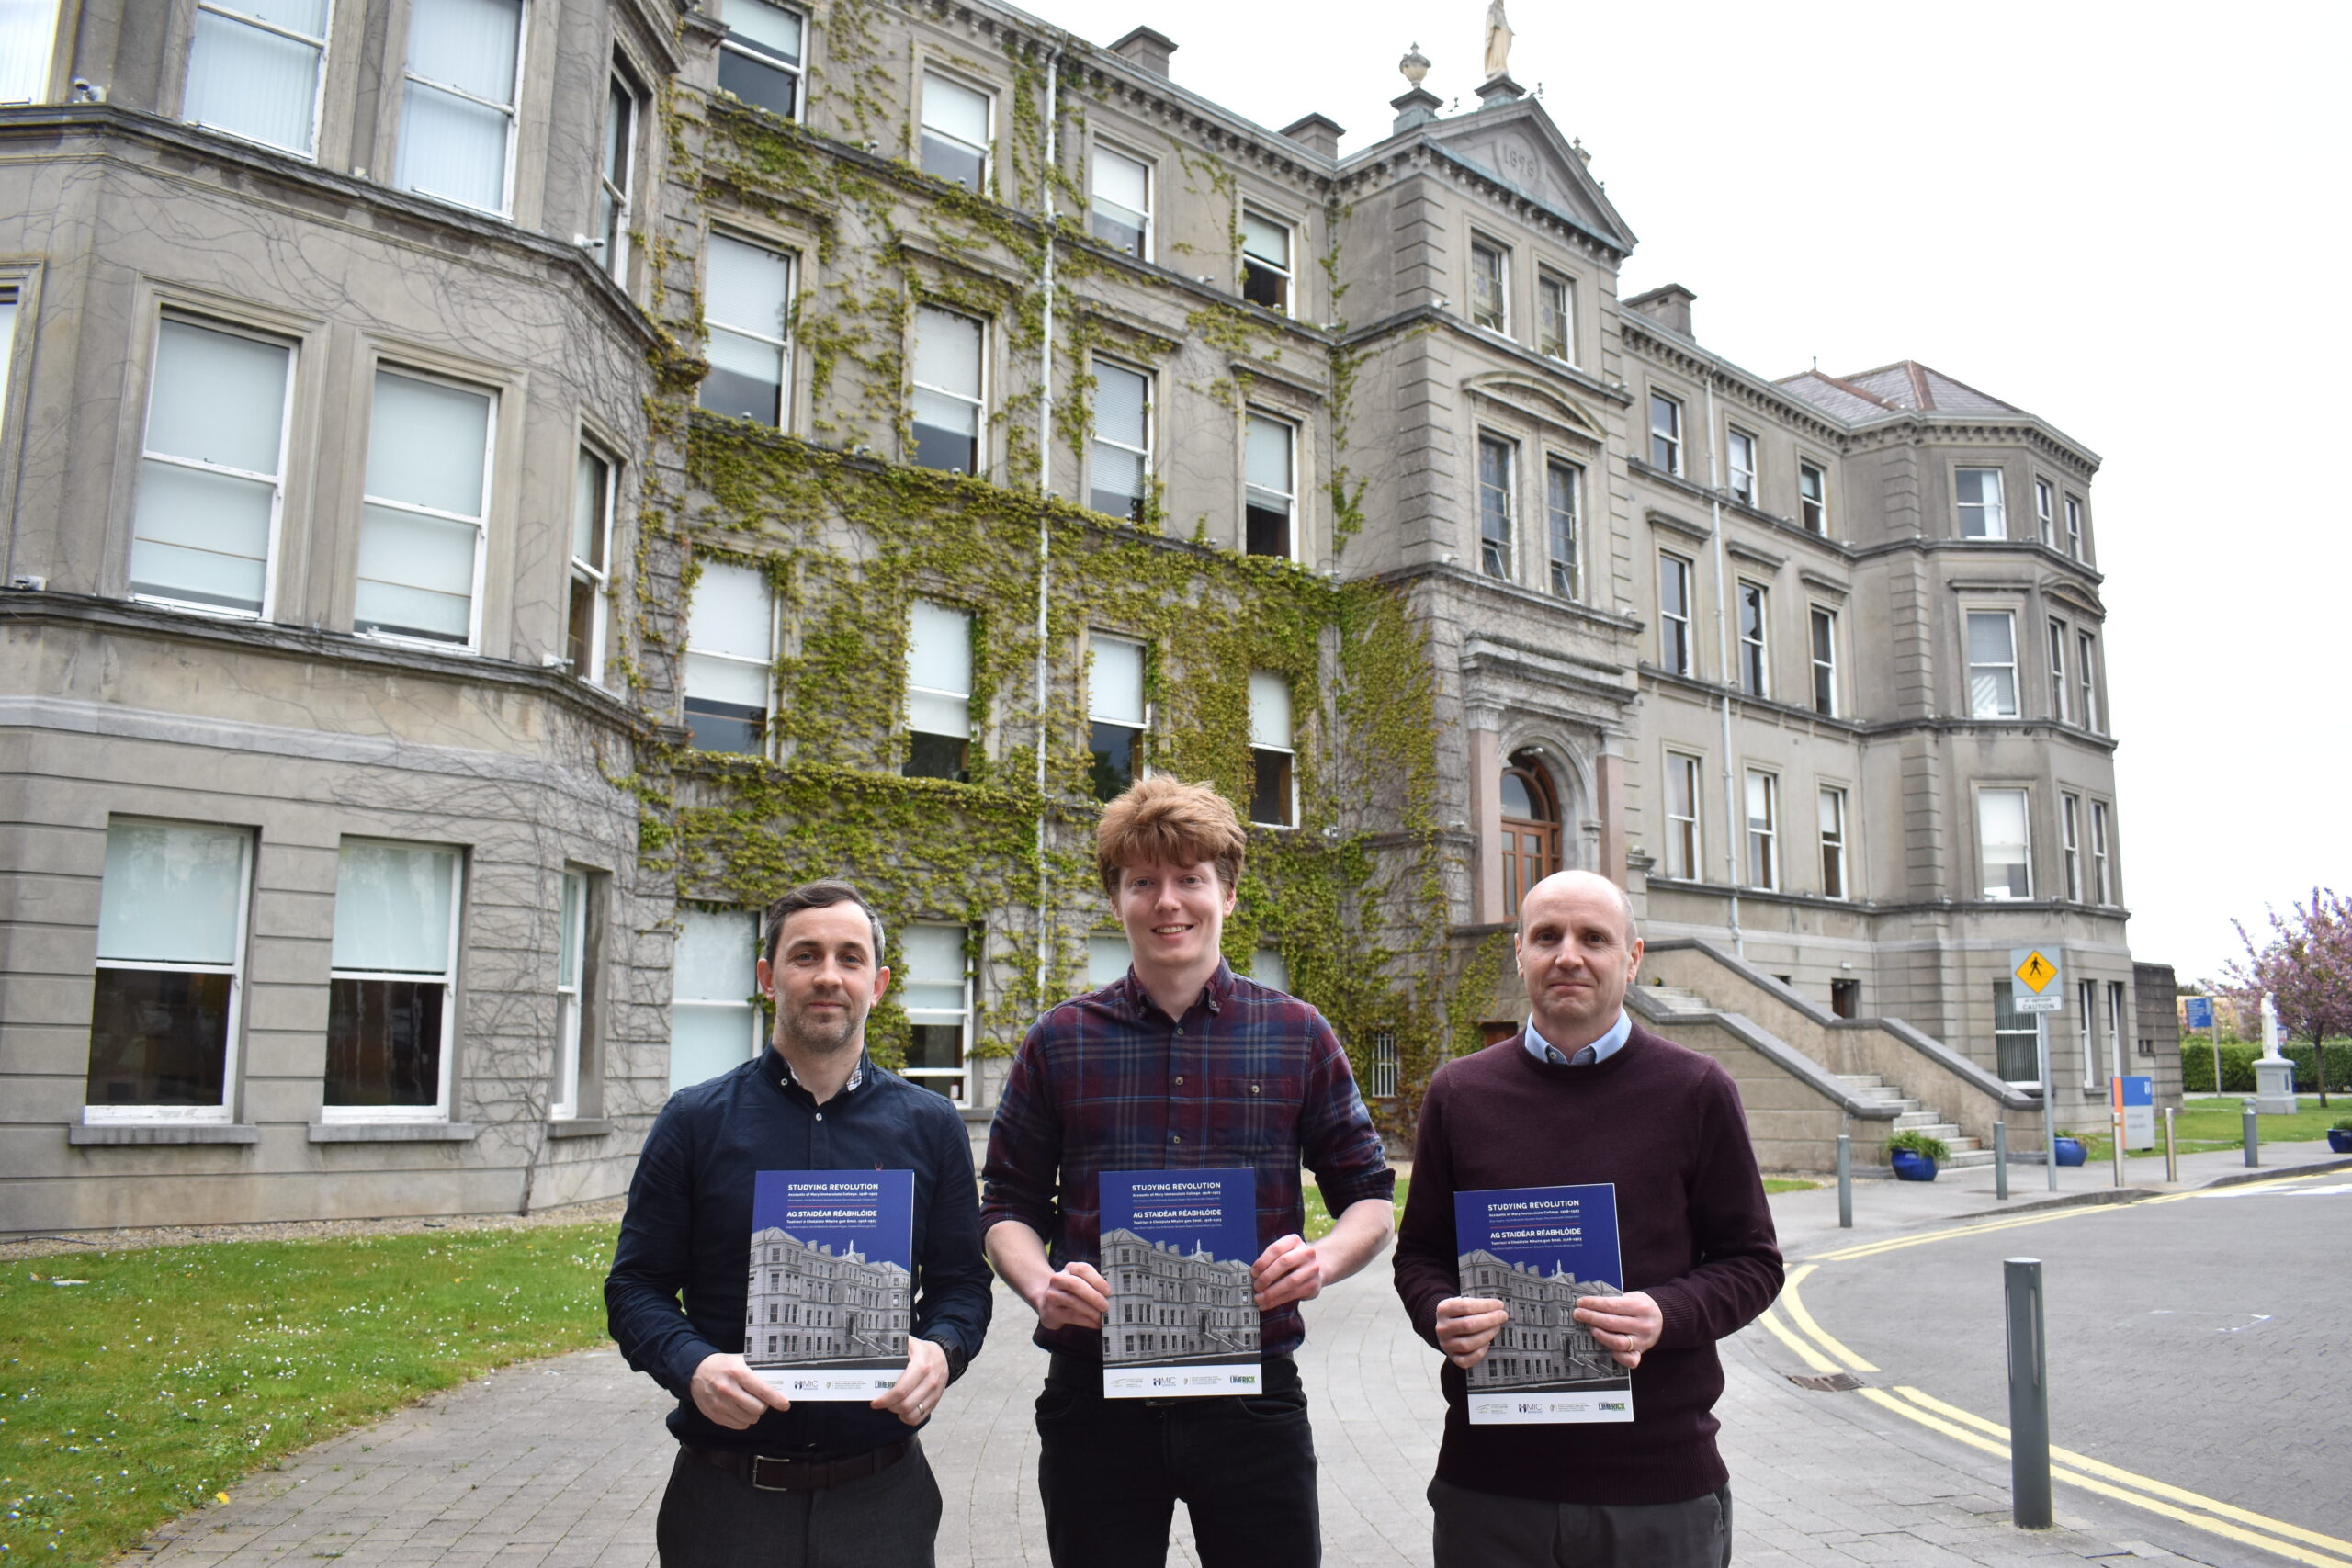 Studying Revolution is a new book that collates primary source material to tell the story of how staff & students navigated the revolutionary period. Pictured above are Dr Brian Hughes, Benjamin Ragan and Dr Liam Chambers